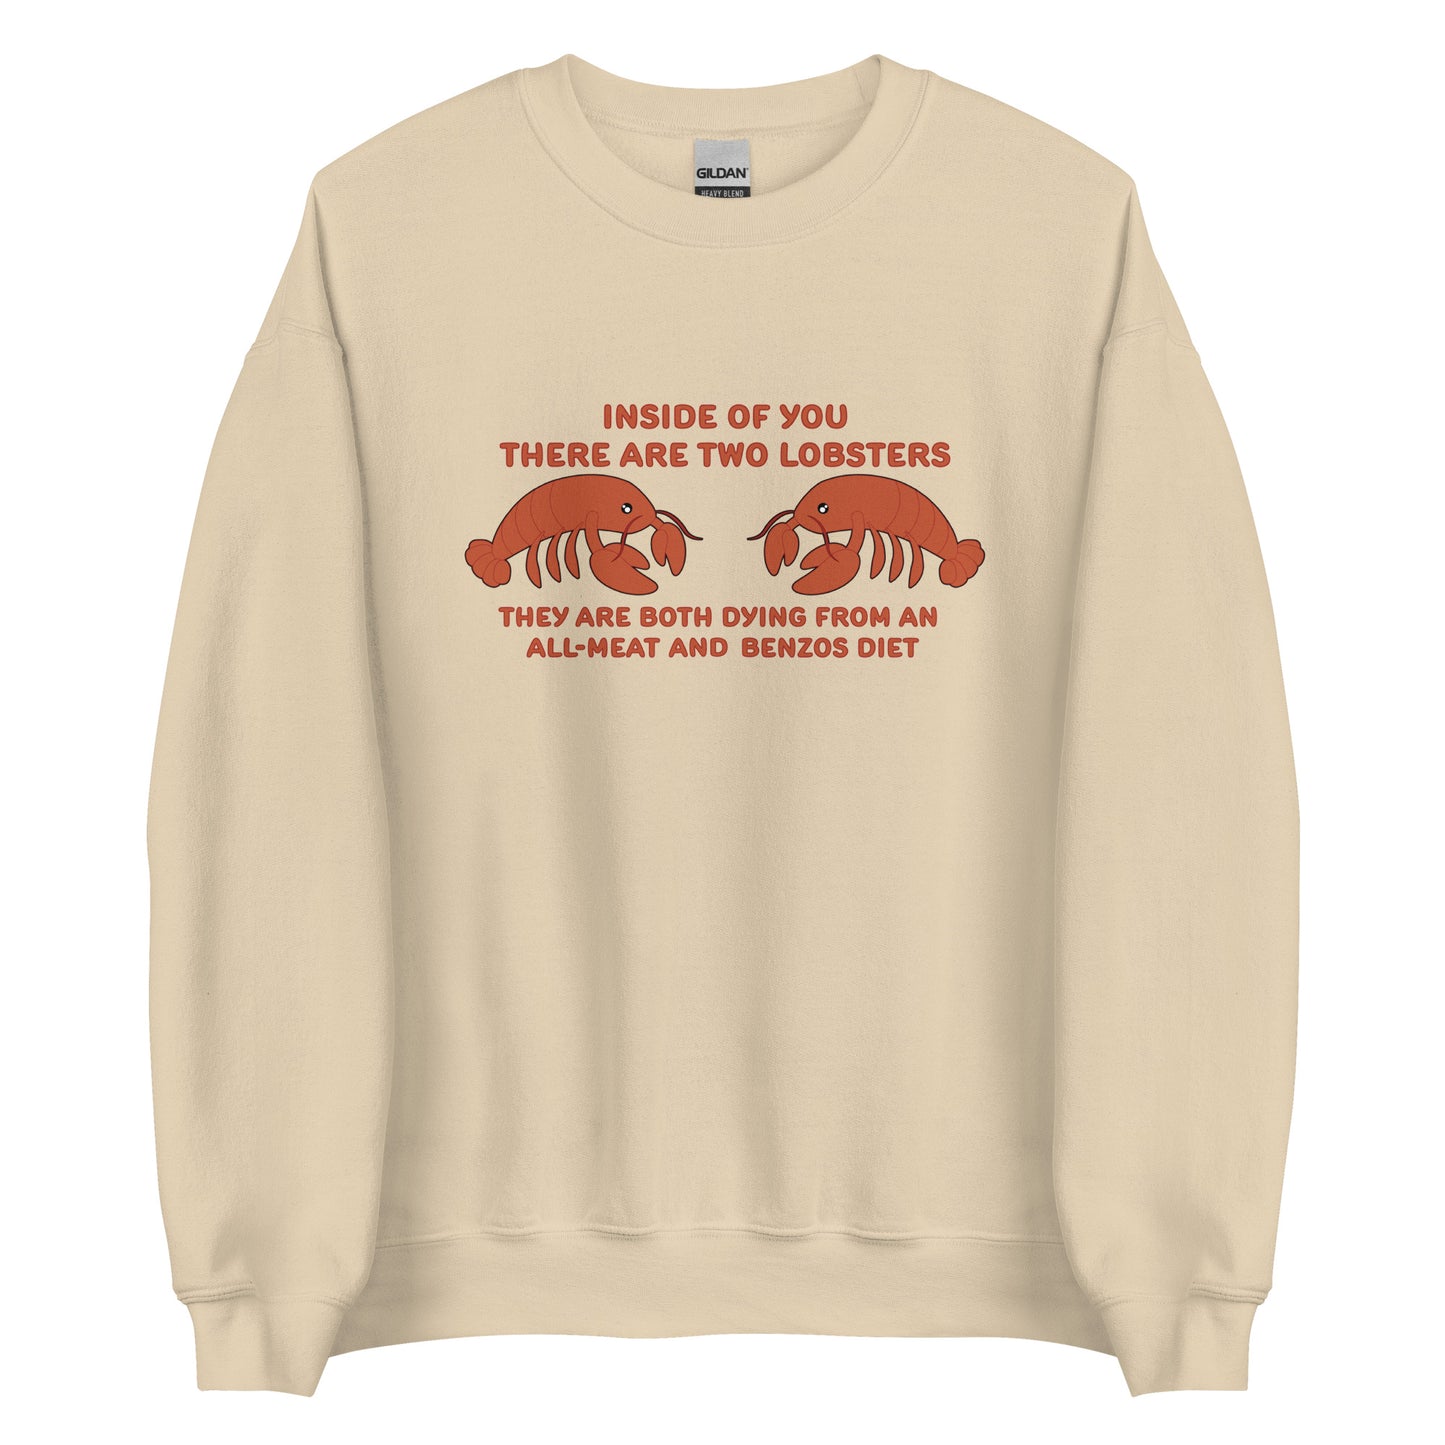 A tan crewneck sweatshirt featuring an illustration of two lobsters. Text around the lobsters reads "Inside of you there are two lobsters. They are both dying from an all-meat and benzos diet."